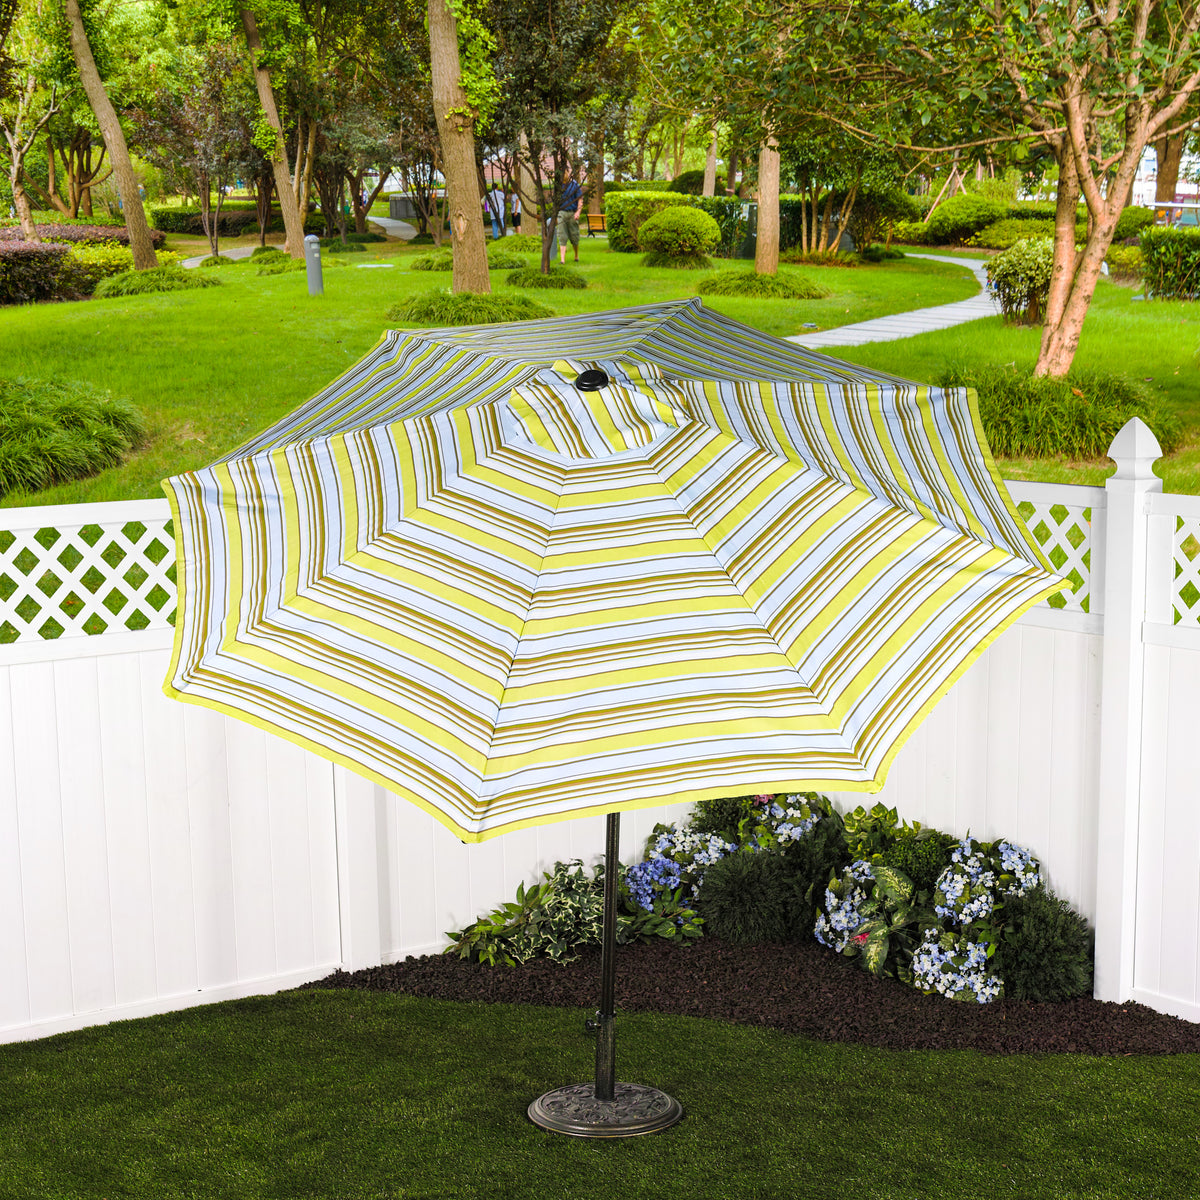 Bliss Outdoors 9-foot Patio Umbrella with Aluminum Pole in the Montauk Stripe variation in the backyard near a fence.